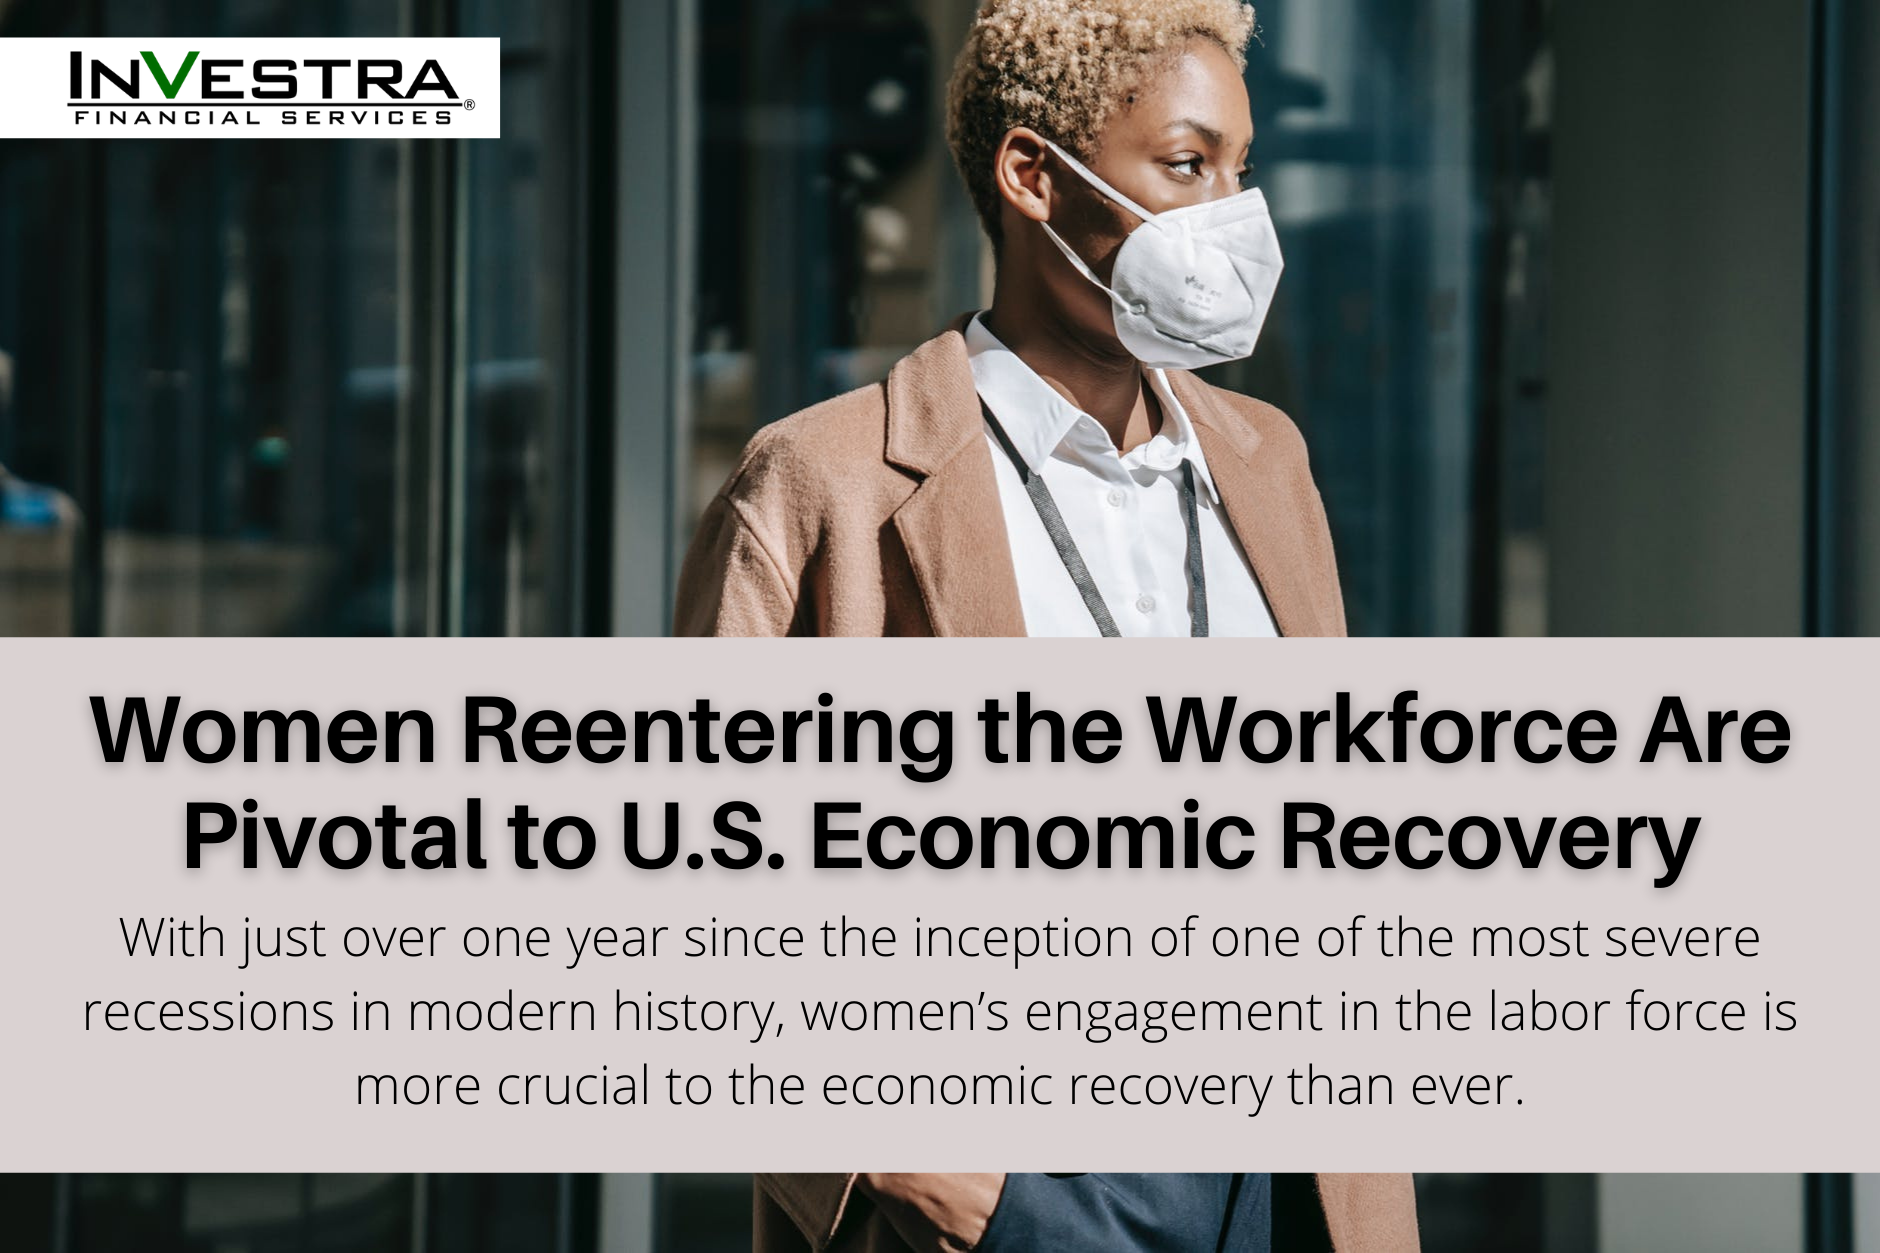 An Employment Priority: Women Reentering the Workforce Are Pivotal to U.S. Economic Recovery